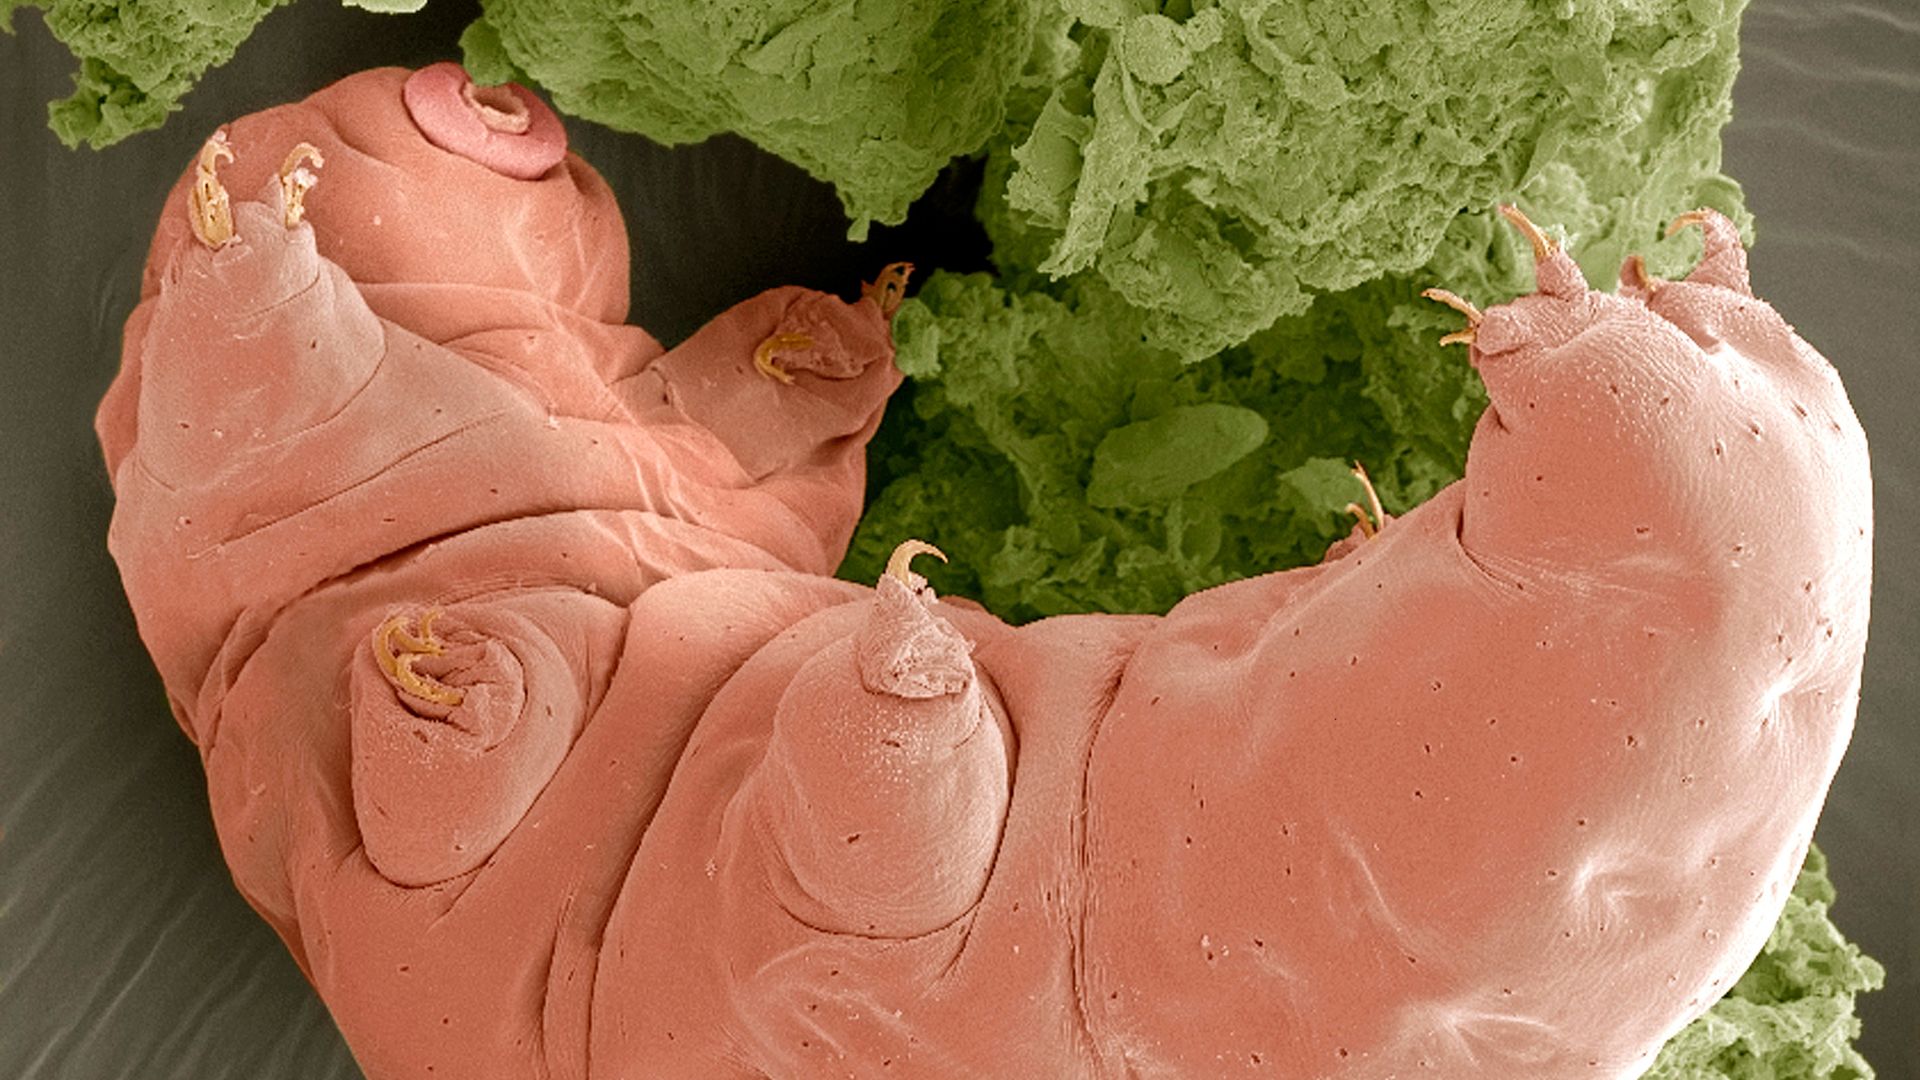 Tardigrade proteins could help stabilize drugs without refrigeration, scientists say